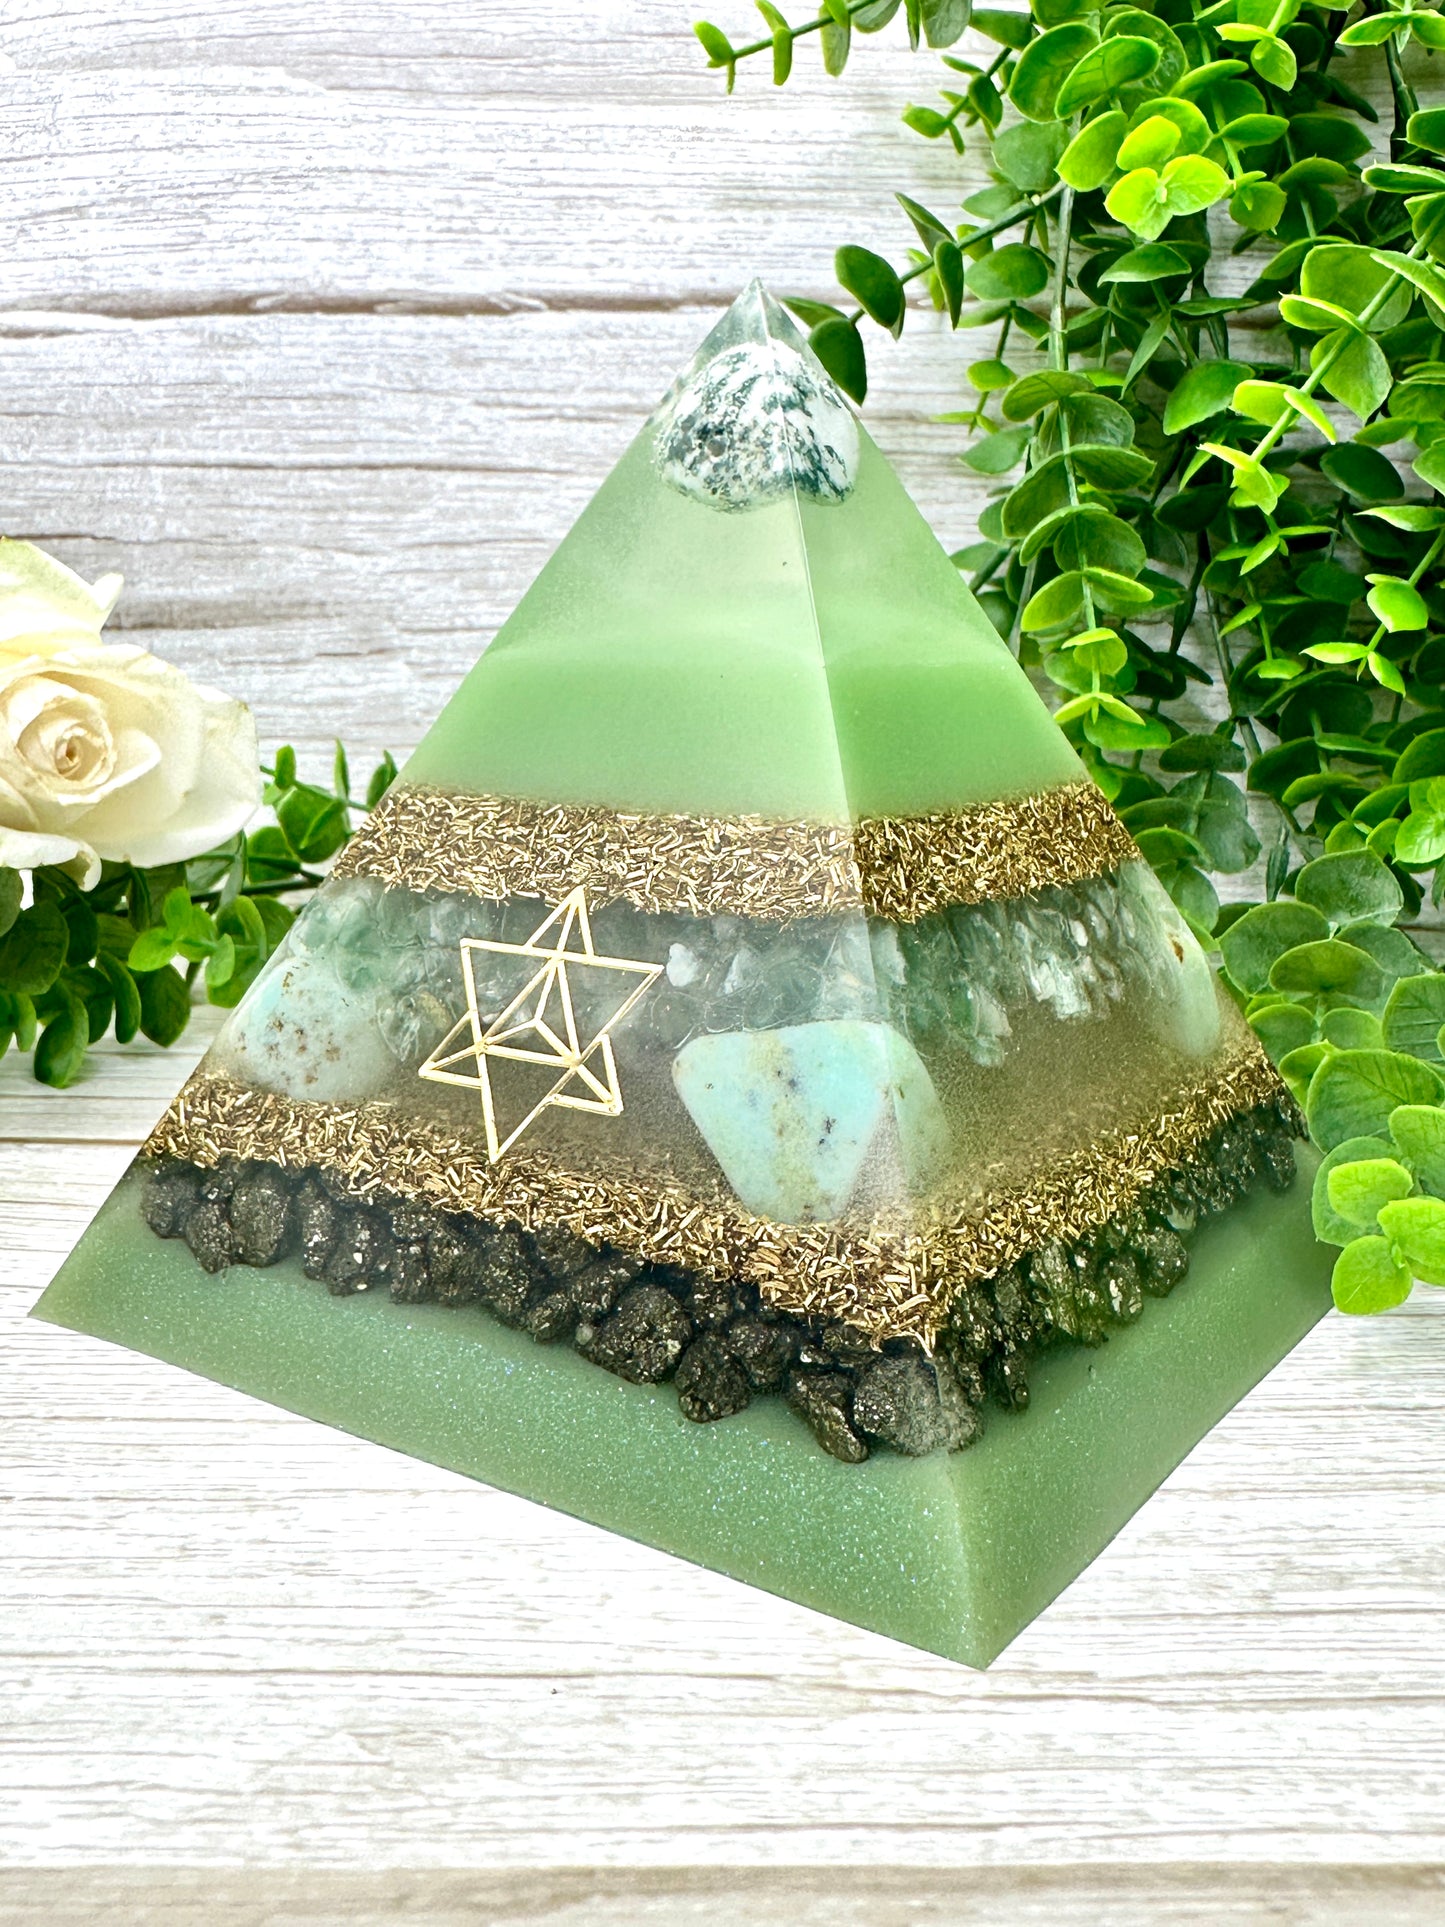 GIA - Orgonite Pyramid - EMF Protector - Tree Agate, Green Fluorite, Chrysoprase, Pyrite and Brass Metals